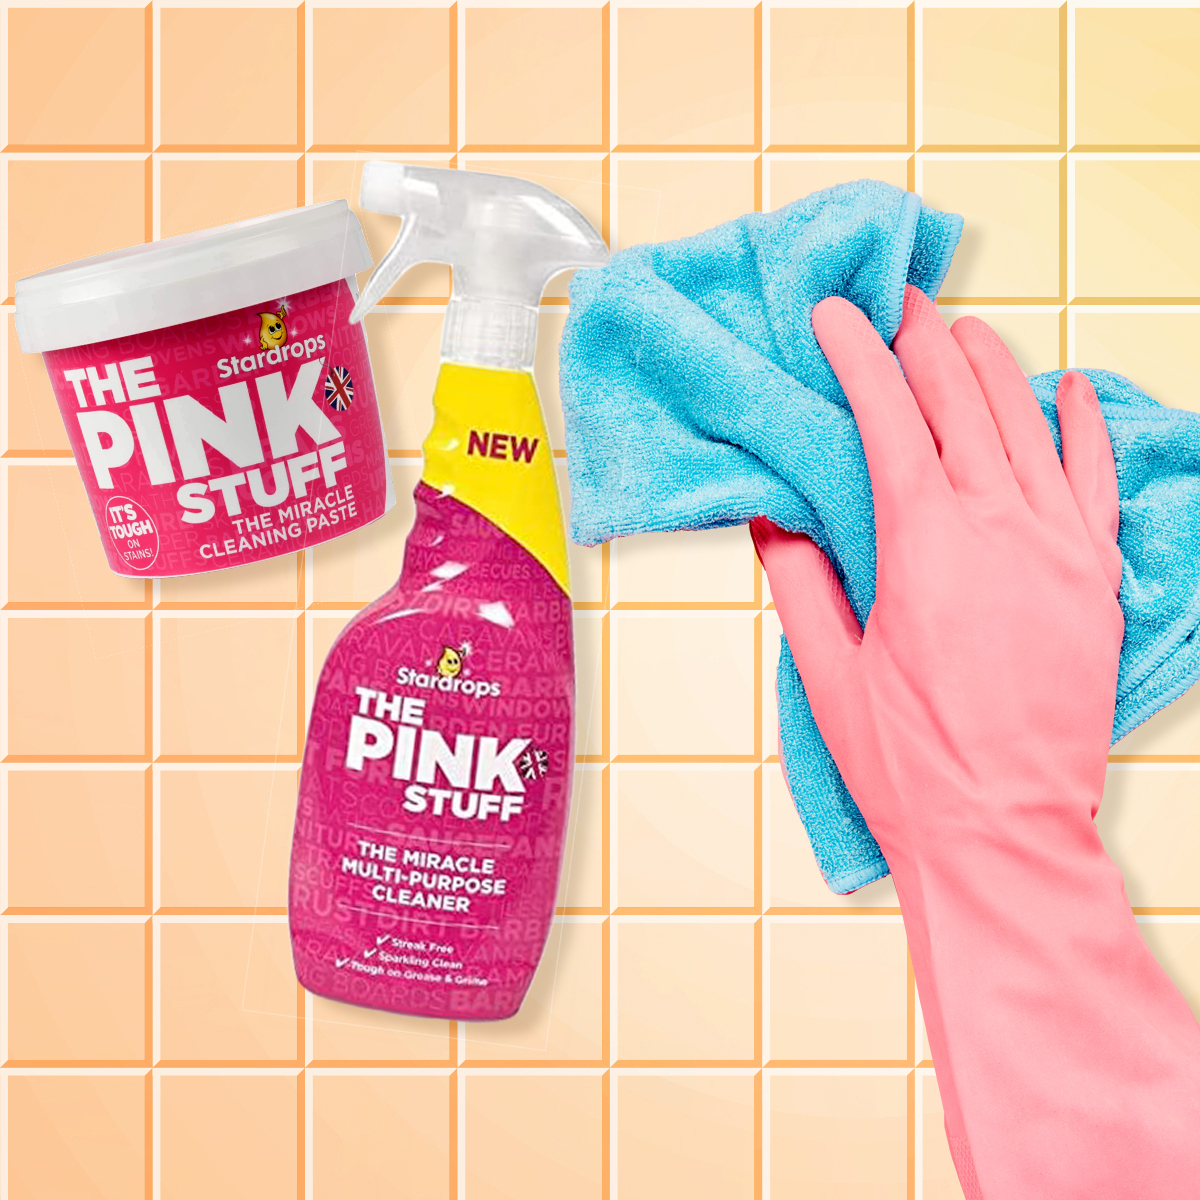 https://akns-images.eonline.com/eol_images/Entire_Site/202144/rs_1200x1200-210504090528-1200-Ecomm-Pink-Stuff-Cleaning-Products.jpg?fit=around%7C1080:1080&output-quality=90&crop=1080:1080;center,top